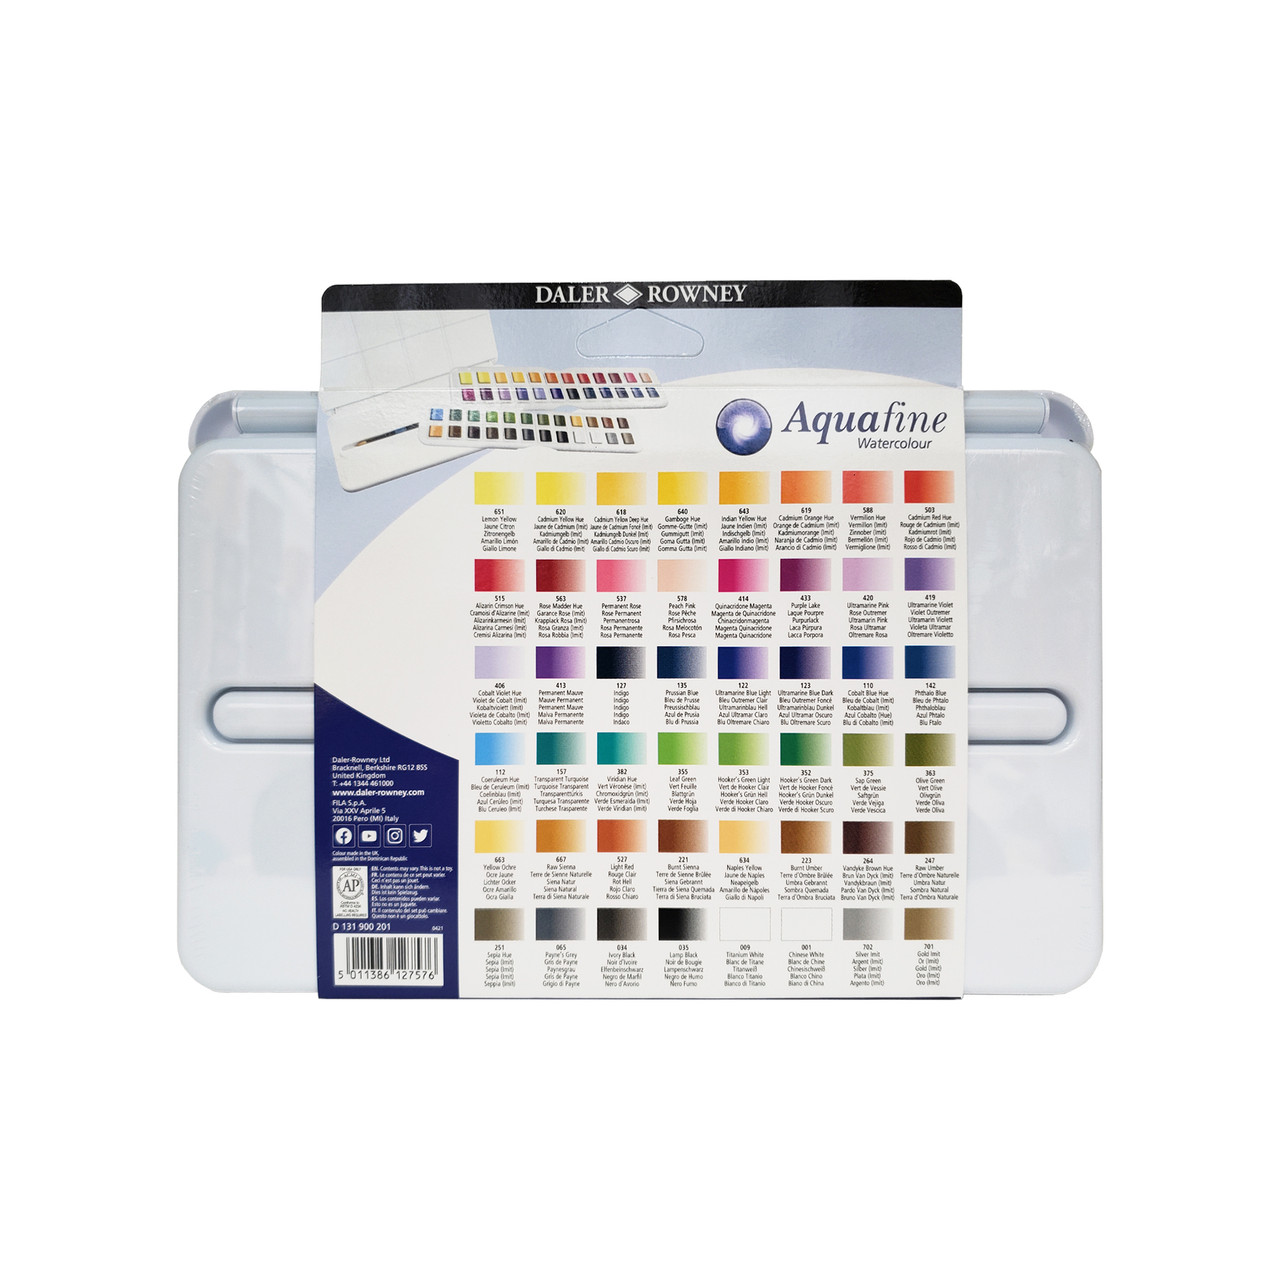 Depicted is the back of the Daler Rowney Aquafine 48-Piece Watercolor Studio Set.